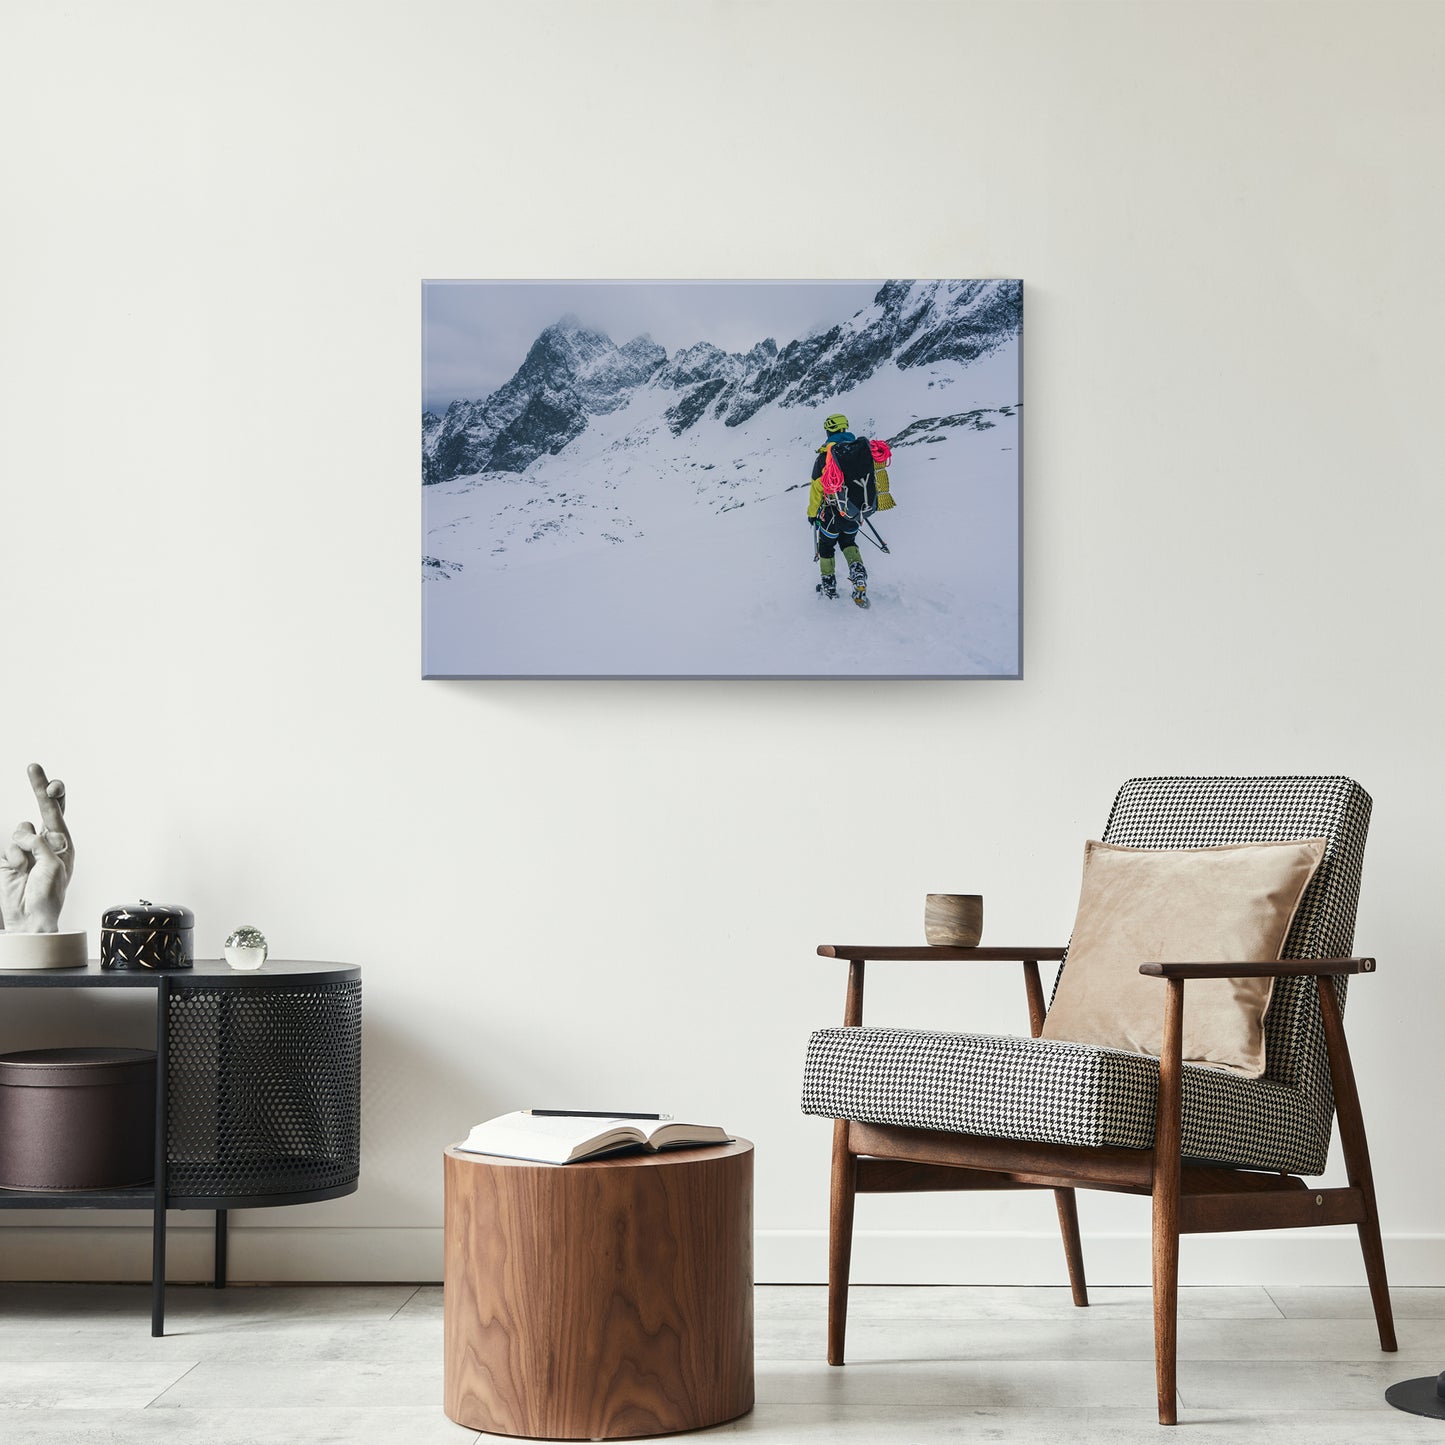 Skiing On Snowy Mountain Canvas Wall Art  Style 1 - Image by Tailored Canvases